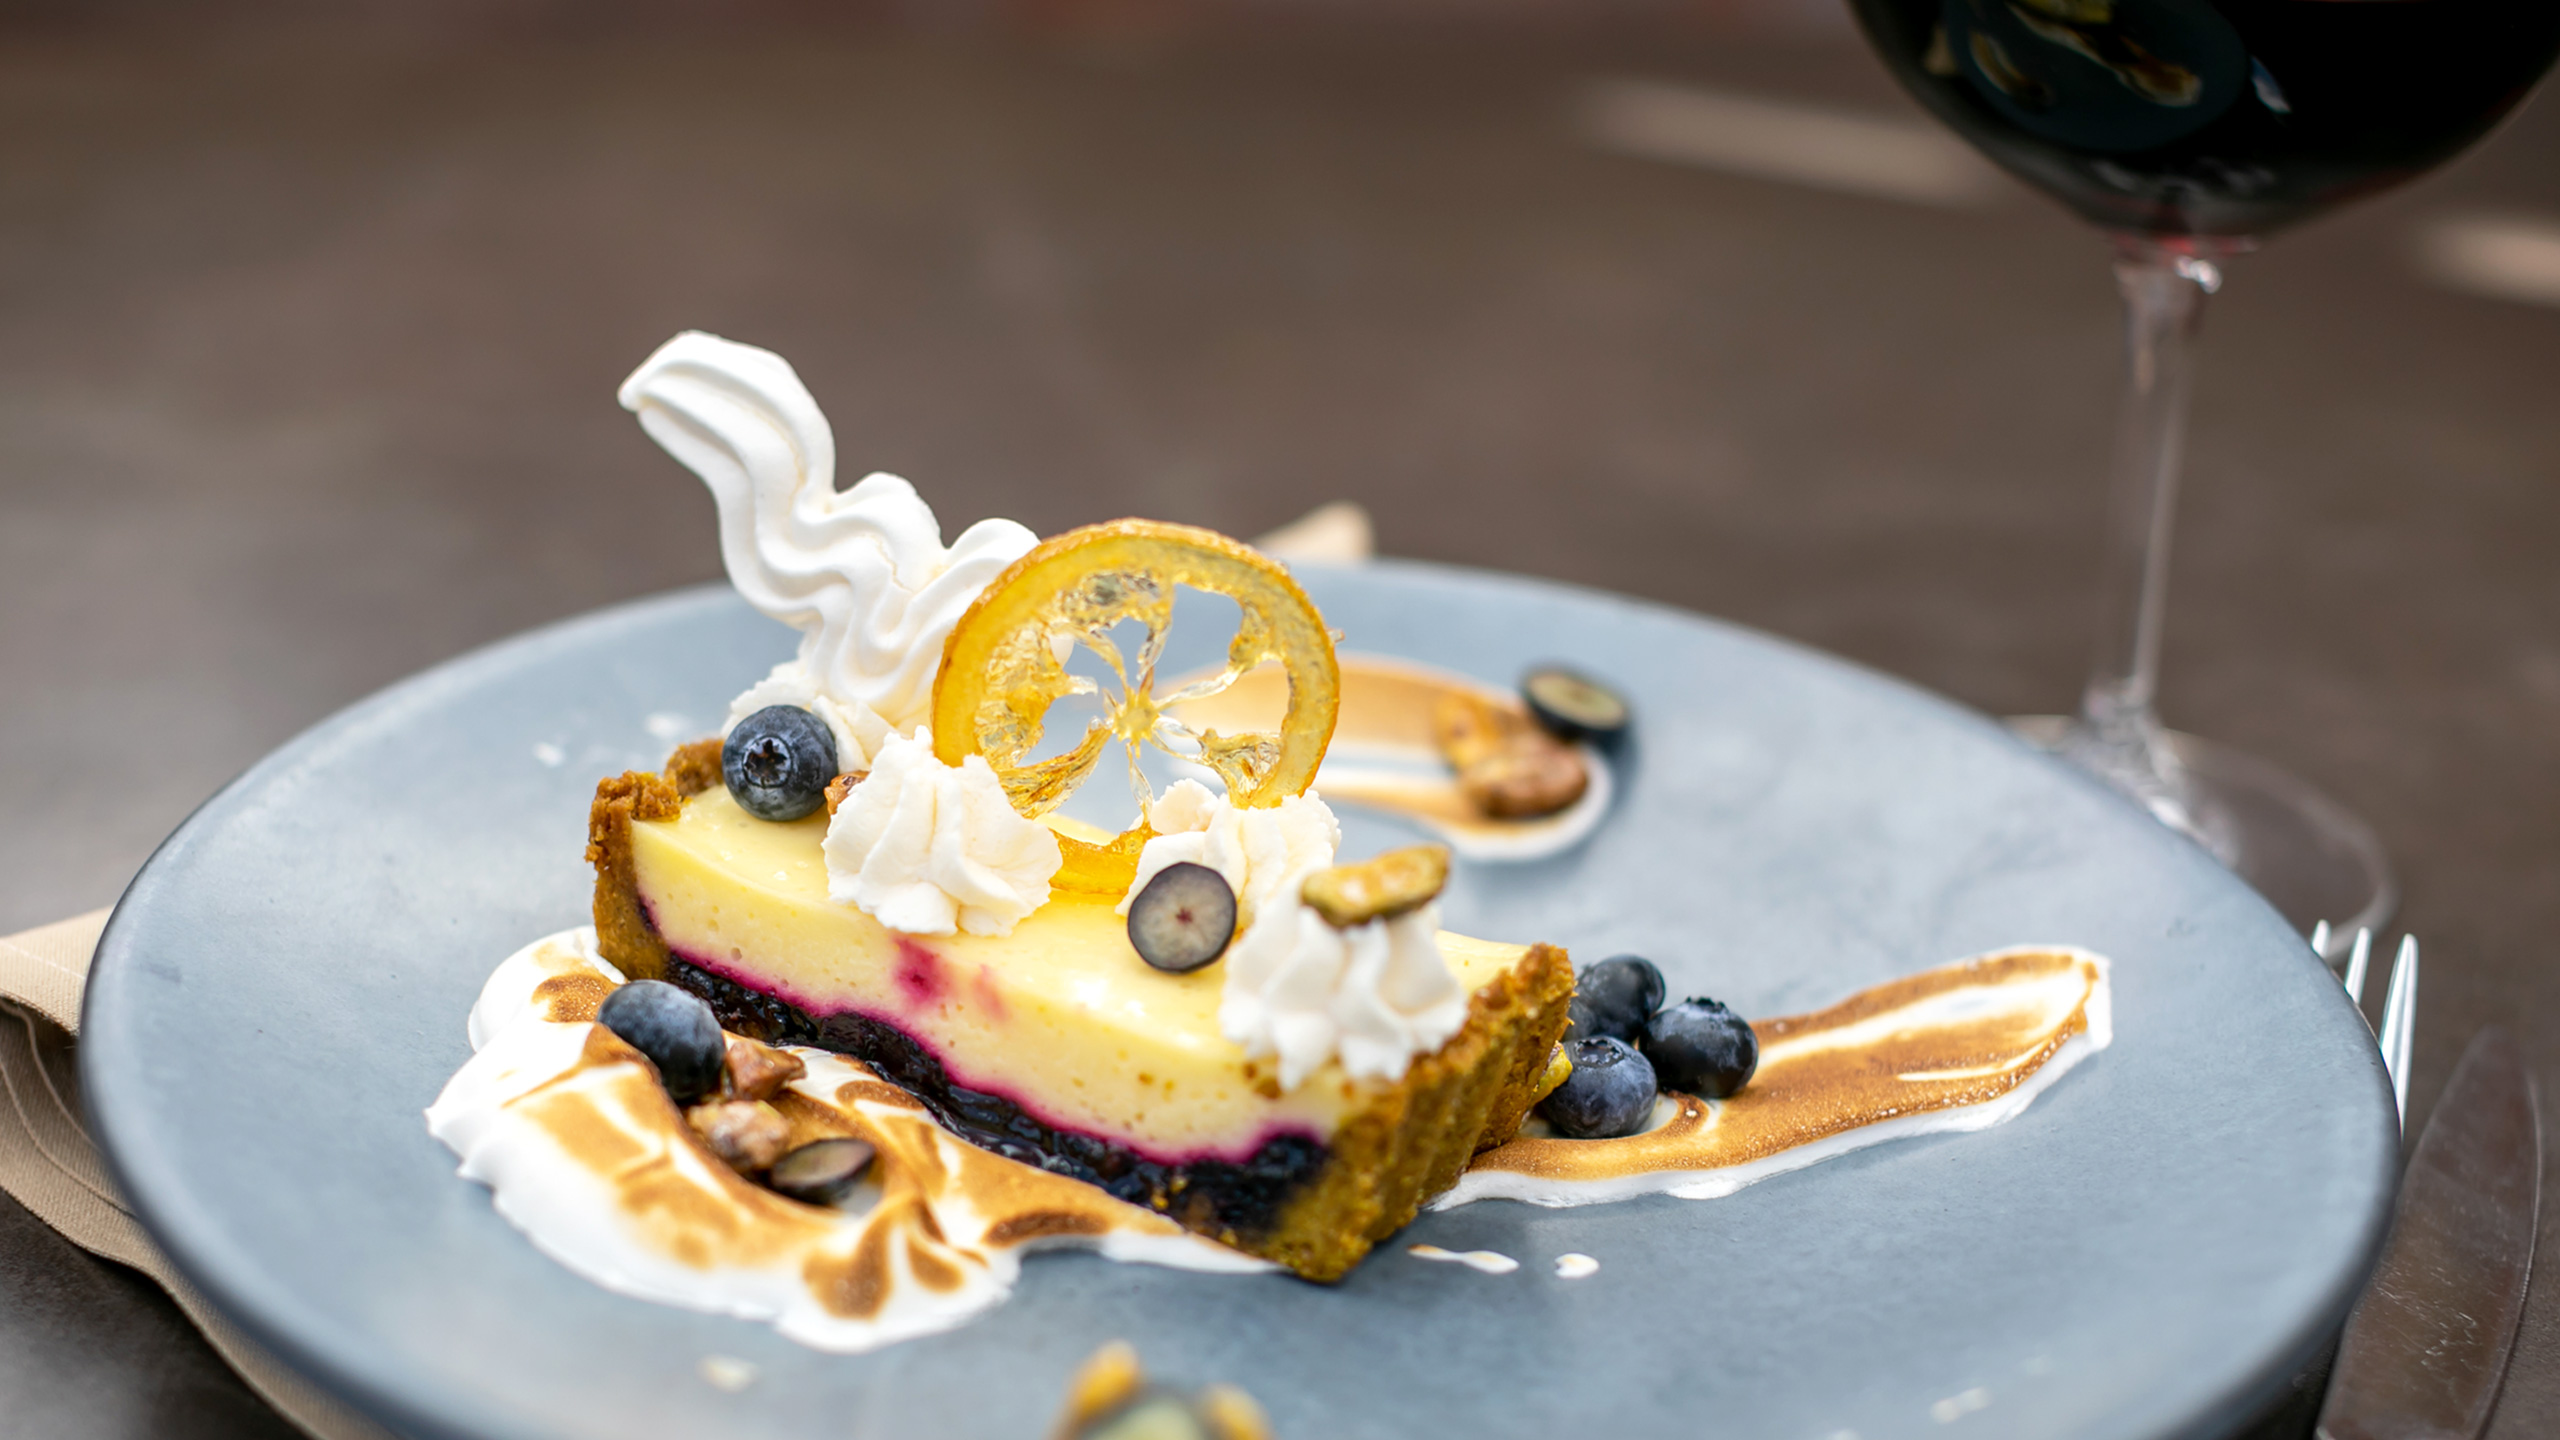 Lemon tart with blueberry layer and candied orange slice decoration